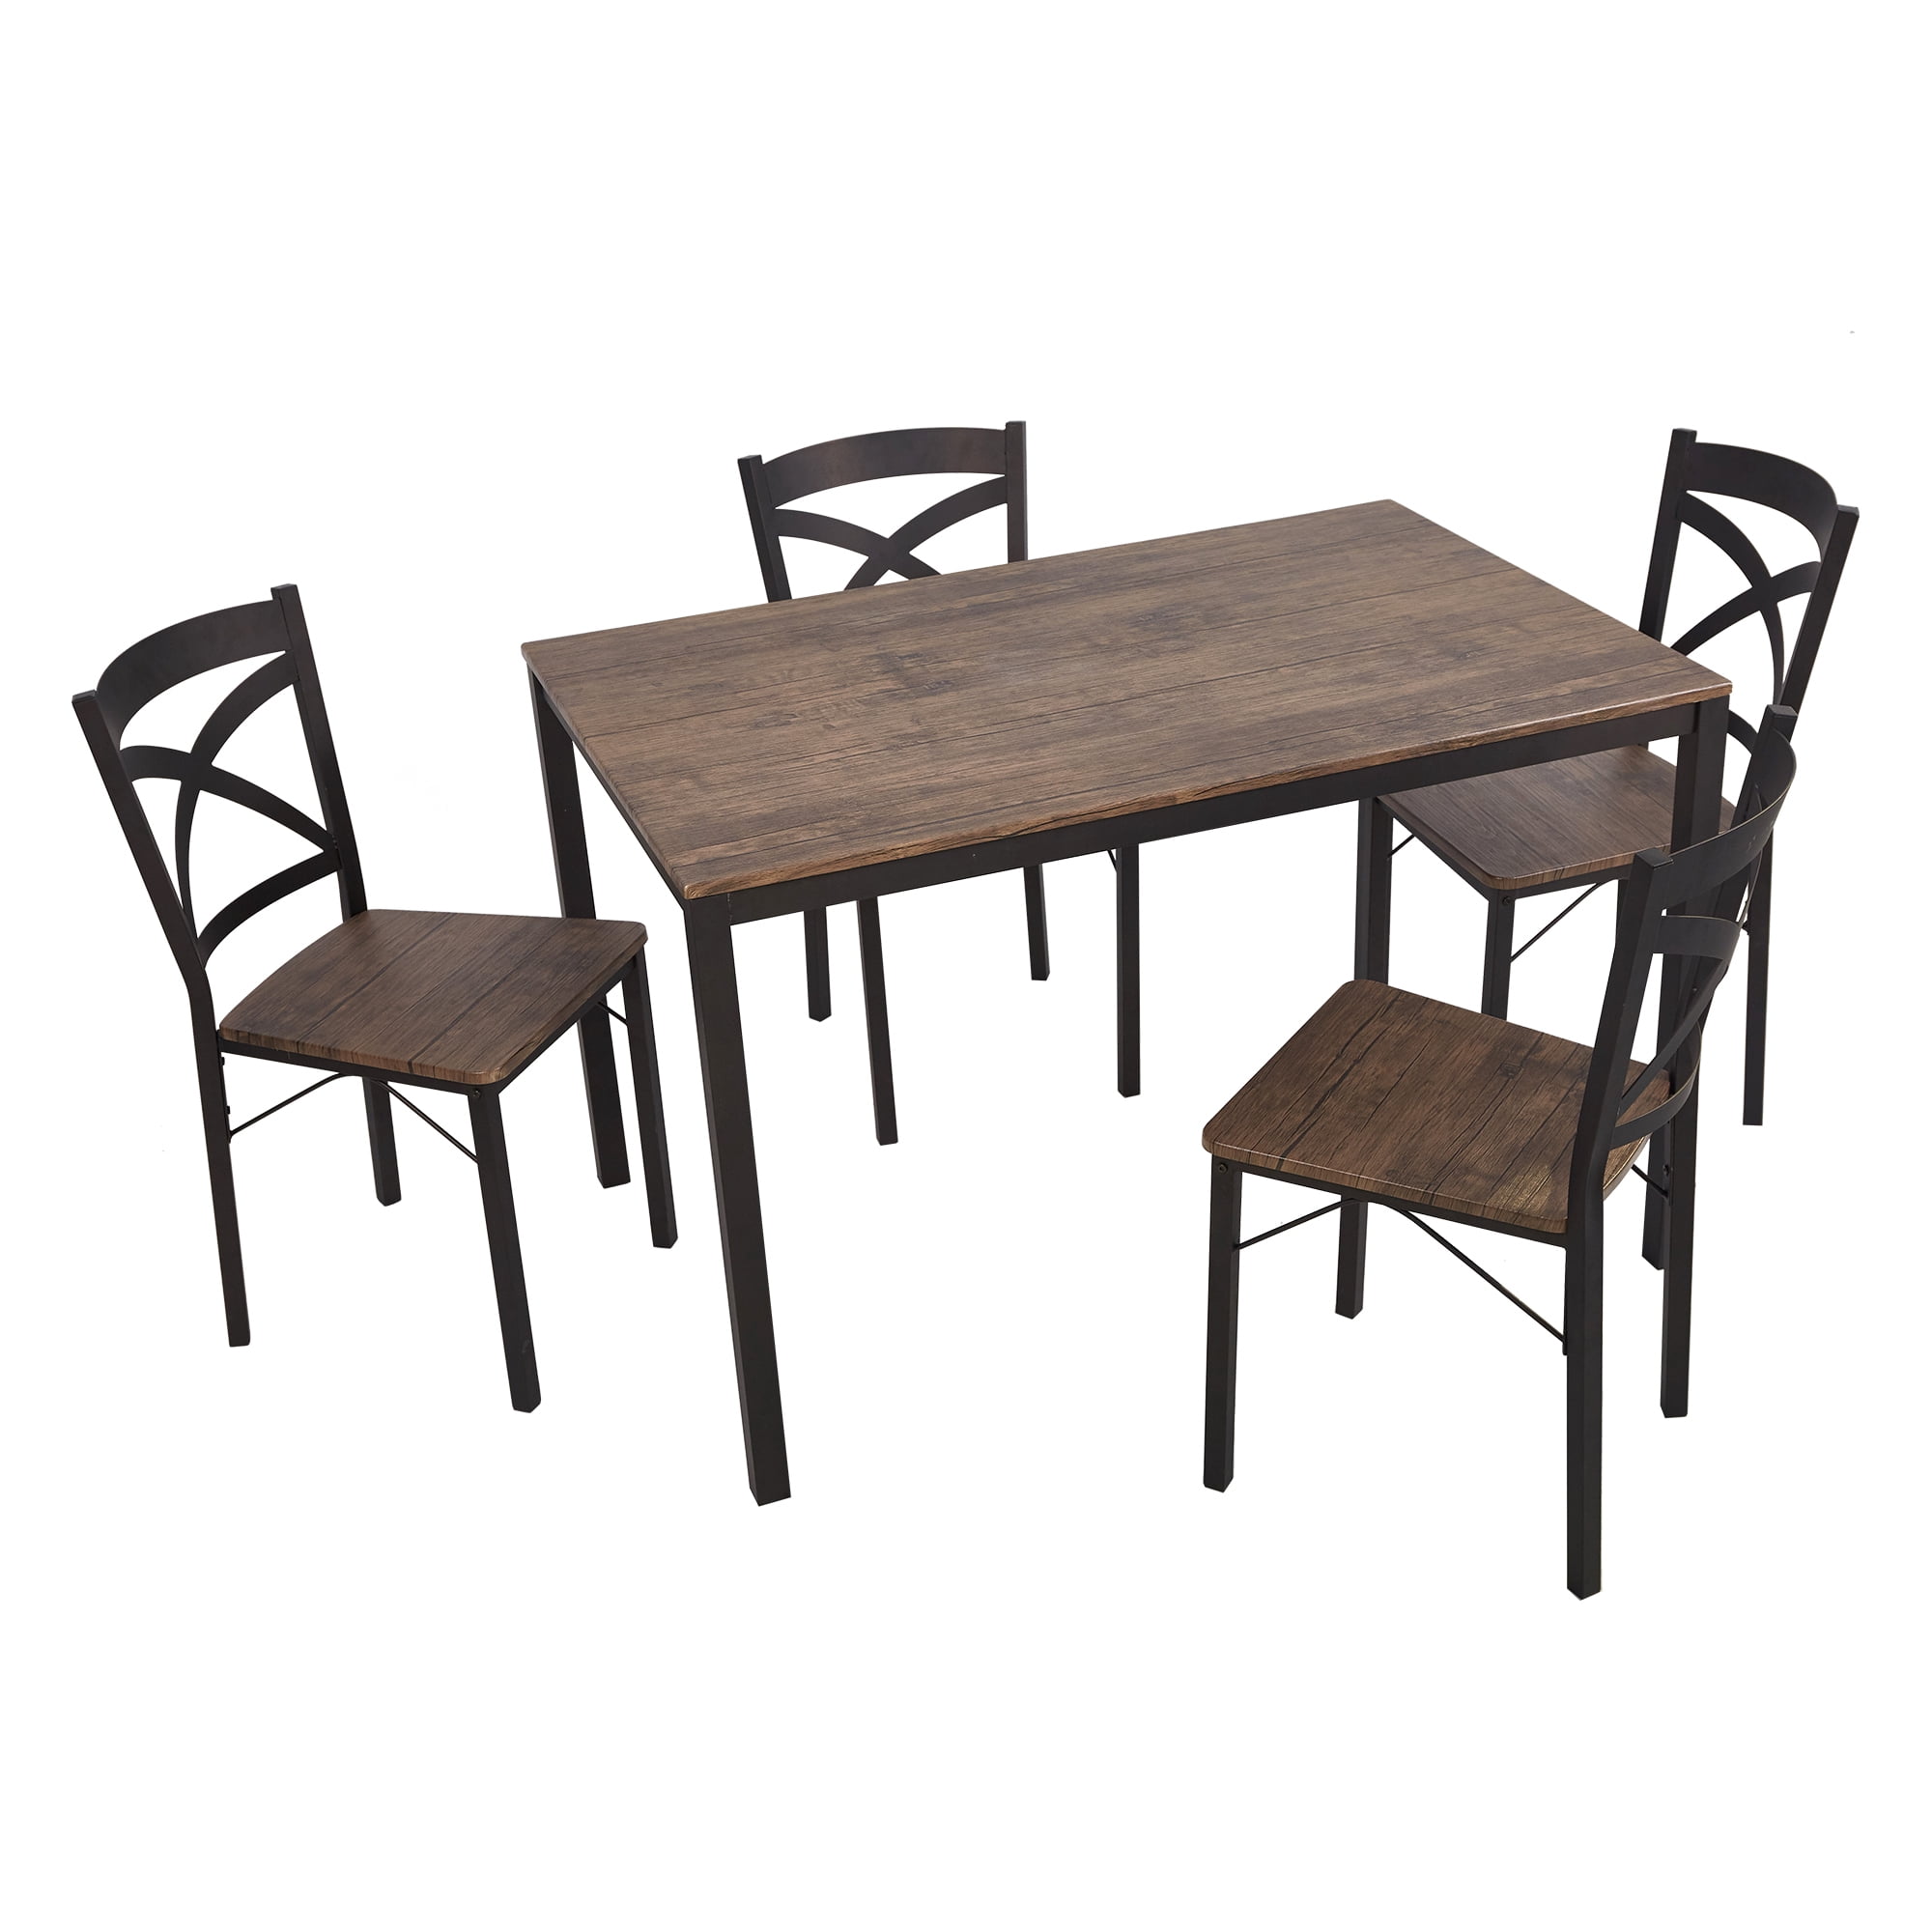 Karmas Product 5 Piece Dining Table Set For 4 Chairs Wood And Metal Kitchen Table Modern And Sleek Dinette Walmartcom Walmartcom